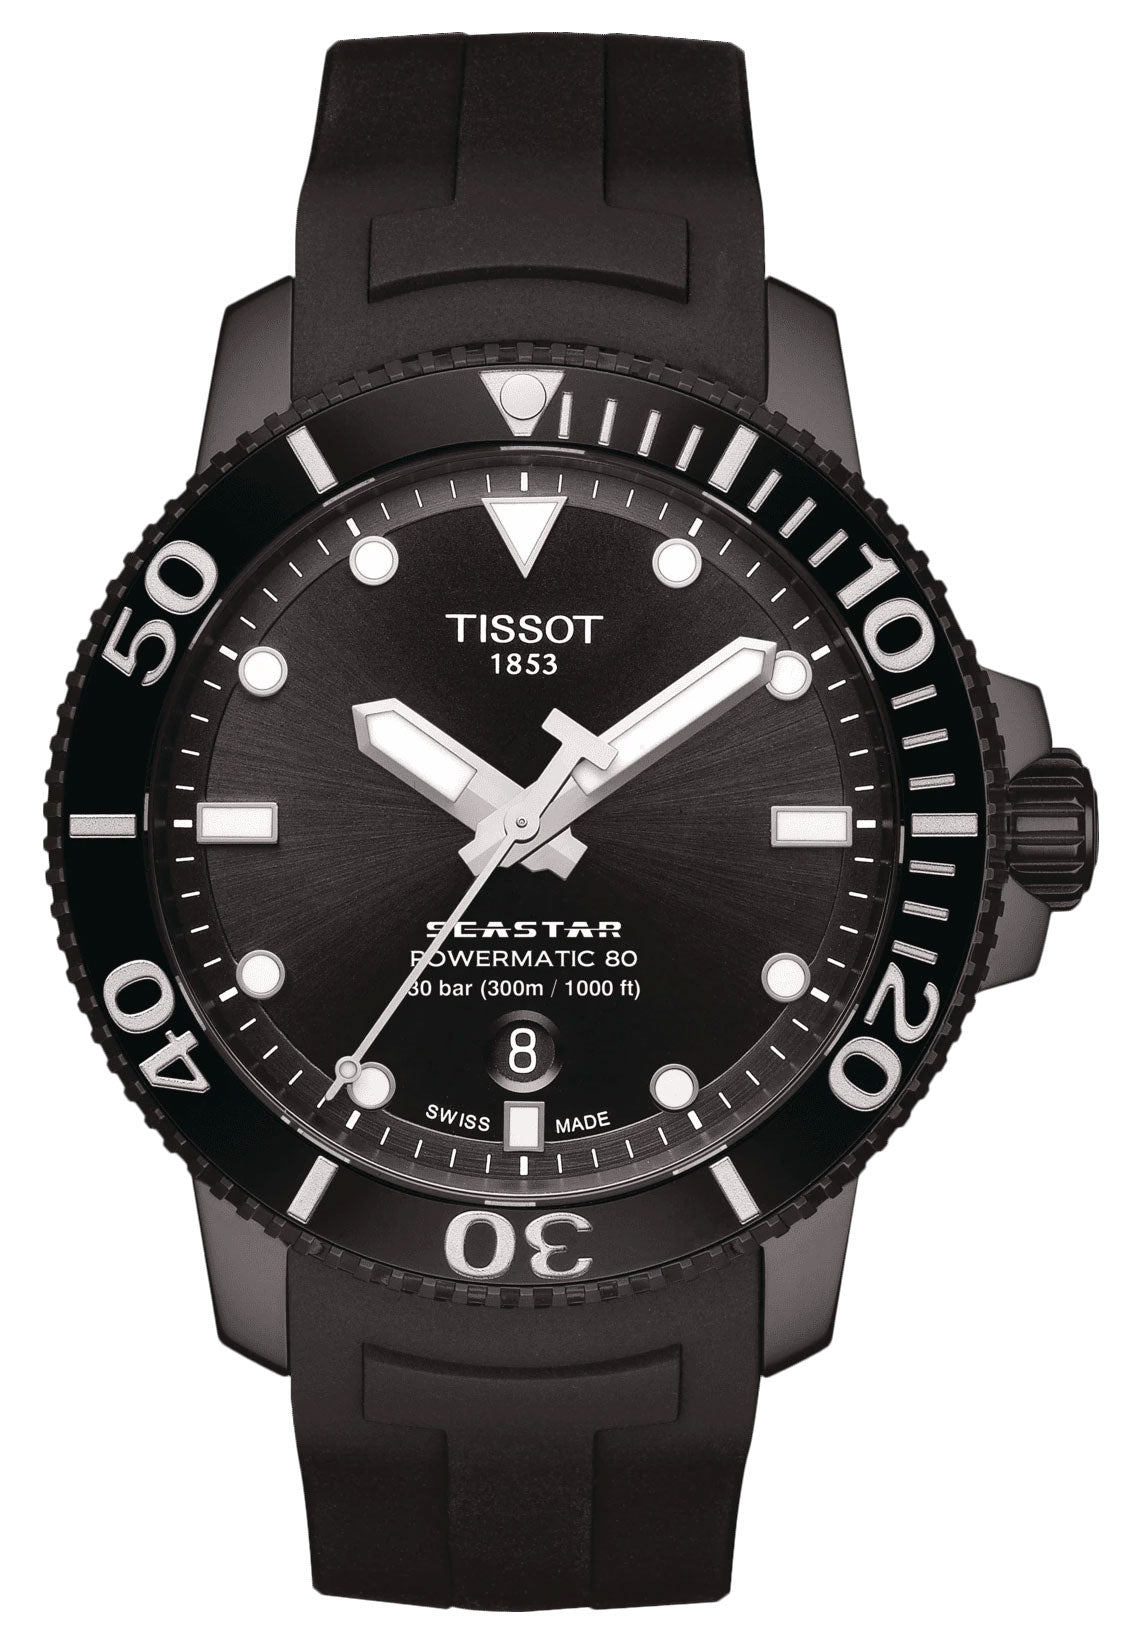 update alt-text with template Watches - Mens-Tissot-T120.407.37.051.00-40 - 45 mm, black, black PVD case, date, divers, mens, menswatches, new arrivals, powermatic 80, round, rpSKU_T120.407.11.041.02, rpSKU_T120.407.11.041.03, rpSKU_T120.407.11.051.00, rpSKU_T120.407.37.041.00, rpSKU_T120.407.37.051.01, rubber, Seastar, swiss automatic, Tissot, uni-directional rotating bezel, watches-Watches & Beyond